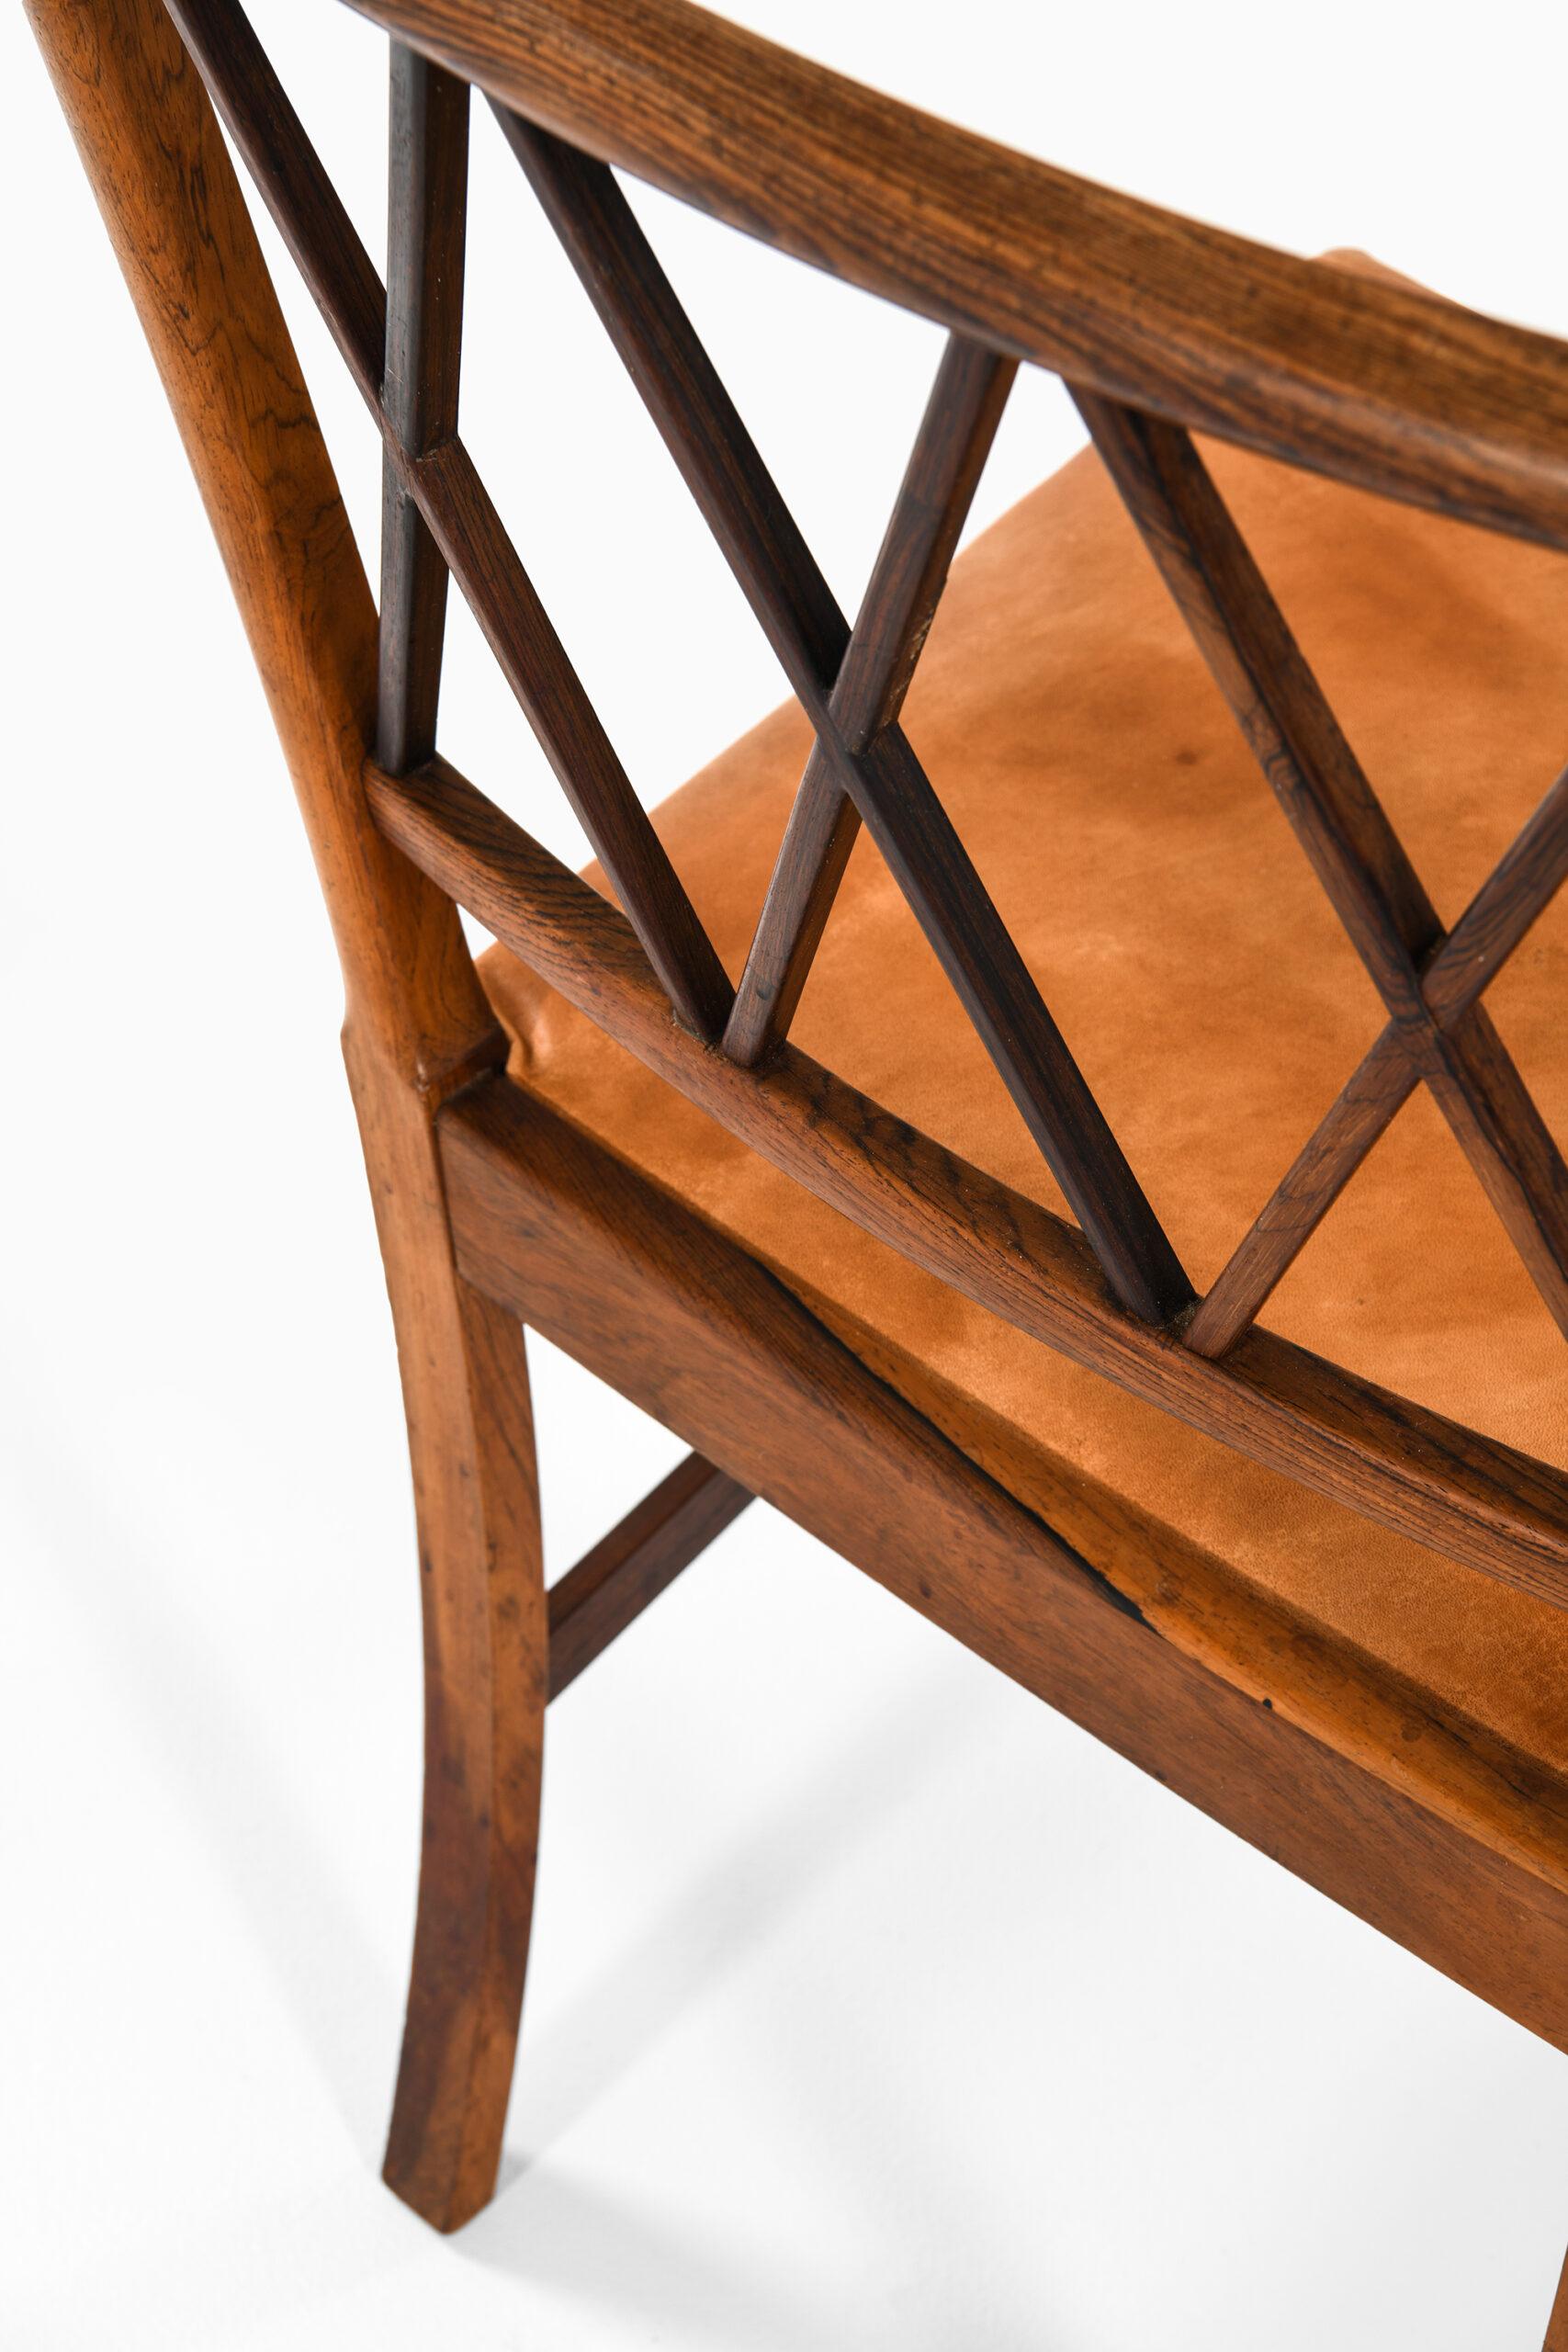 Mid-20th Century Ole Wanscher Dining Chairs Produced by Cabinetmaker A.J. Iversen